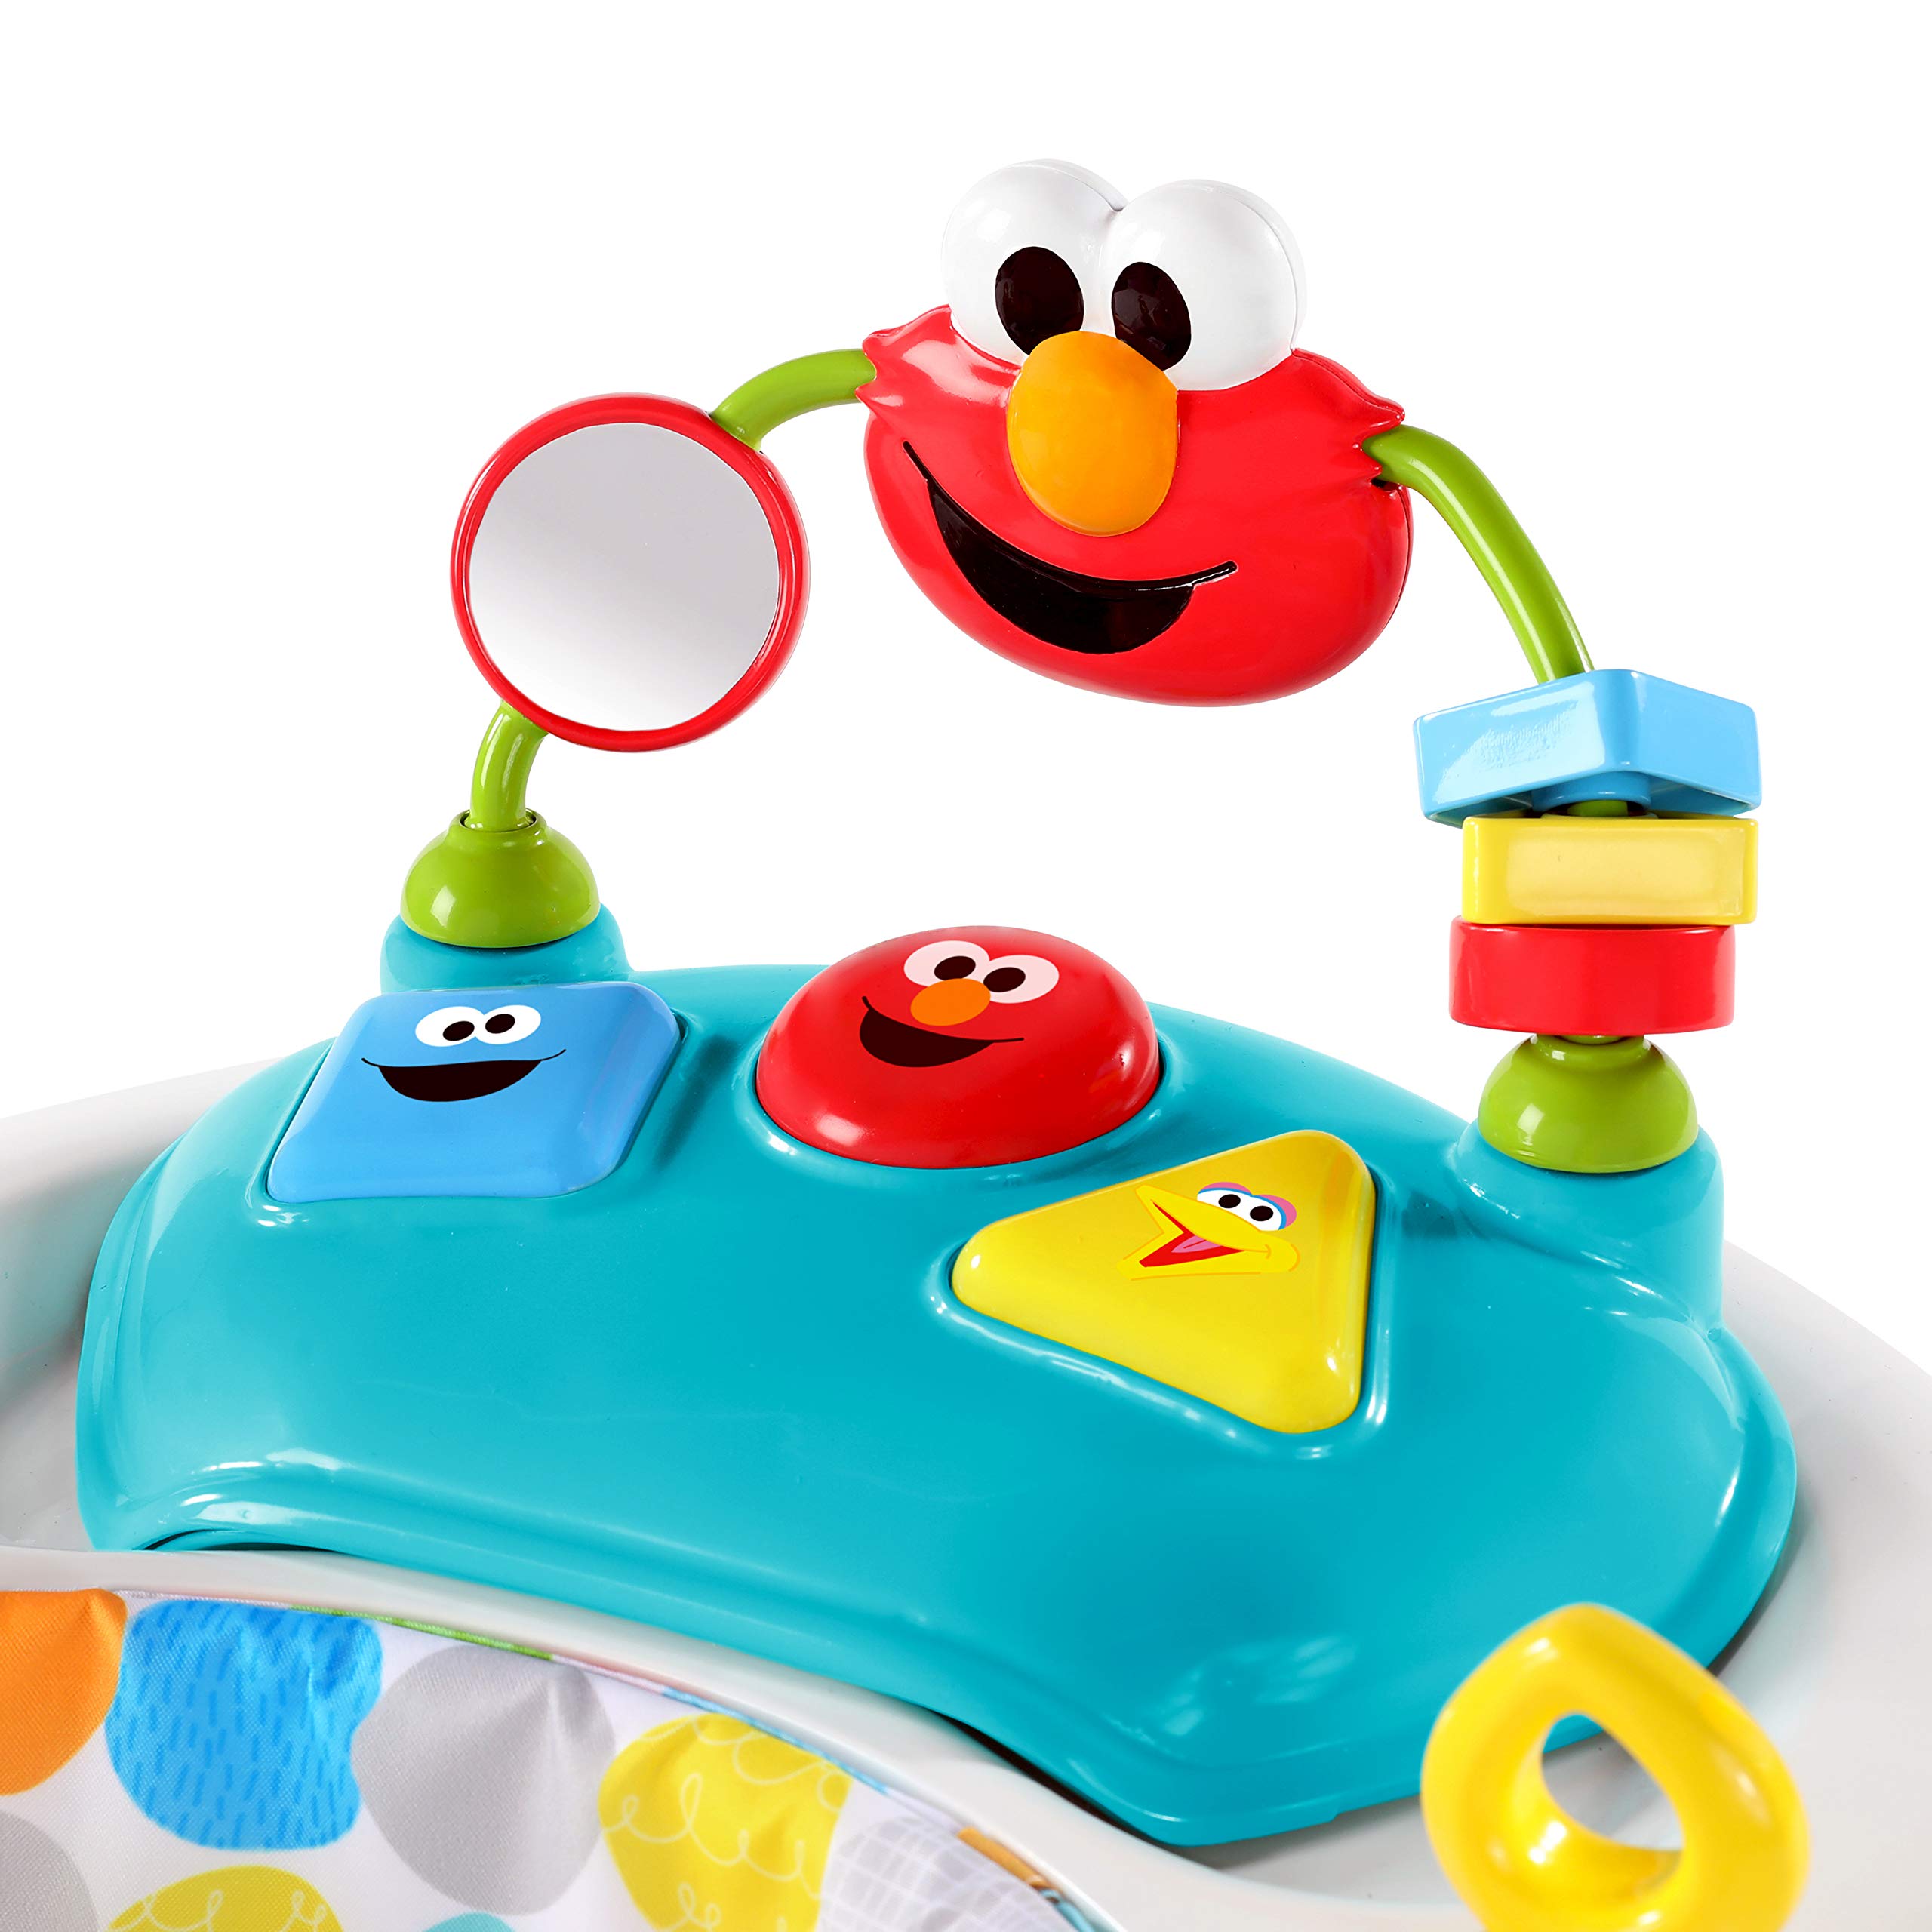 Bright Starts Sesame Street I Spot Elmo! Baby Activity Center & Walker - Easy-Fold Frame and 30+ Songs and Sounds by Elmo and Friends, 6-12 Months